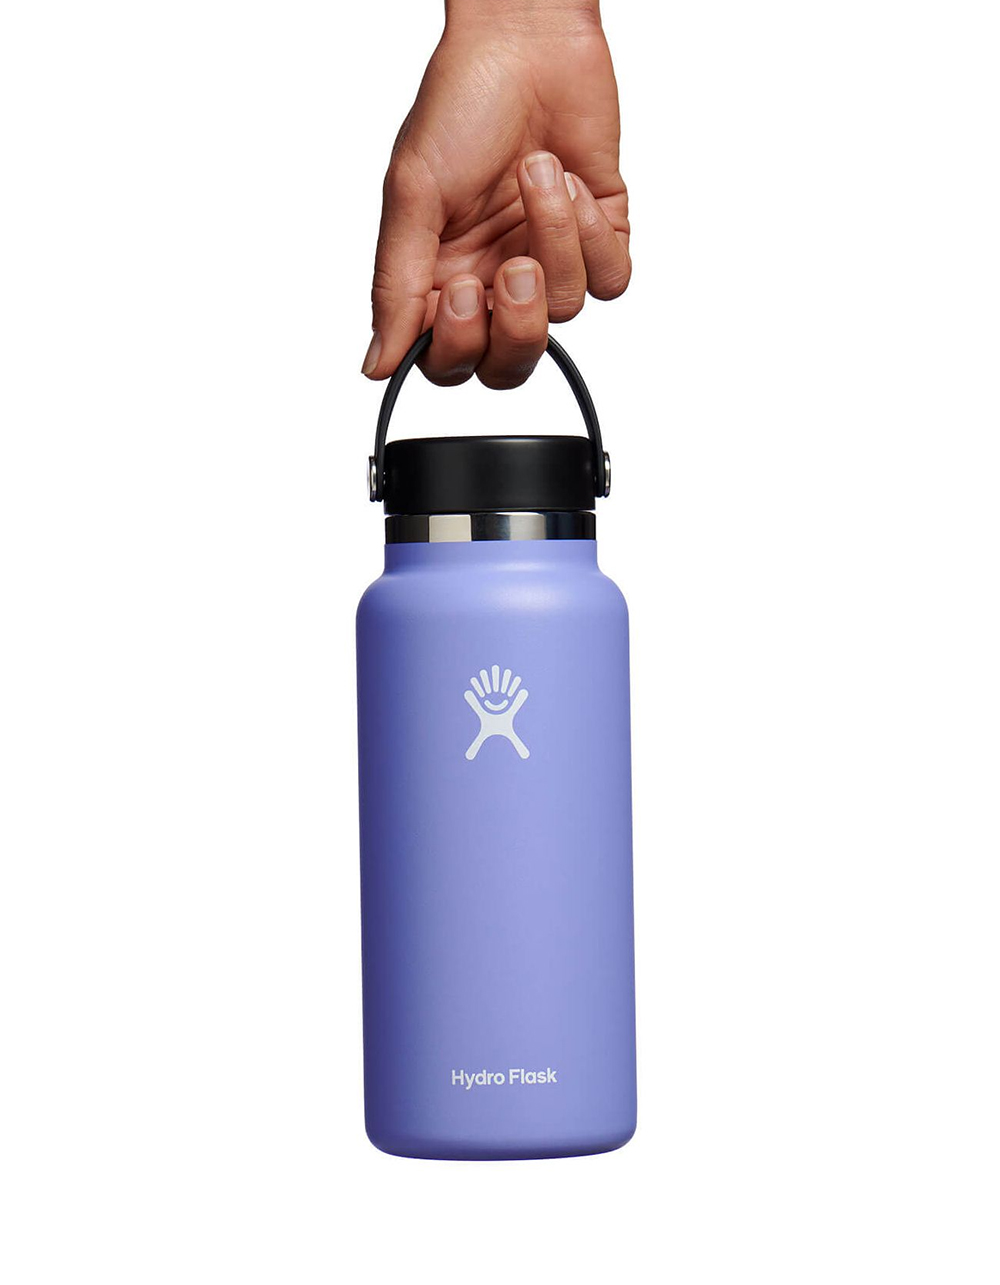  Hydro Flask Flex Cap Bottle with Boot - Stainless Steel  Reusable Water Bottle - Vacuum Insulated - 32 oz (Dark Blue): Home & Kitchen